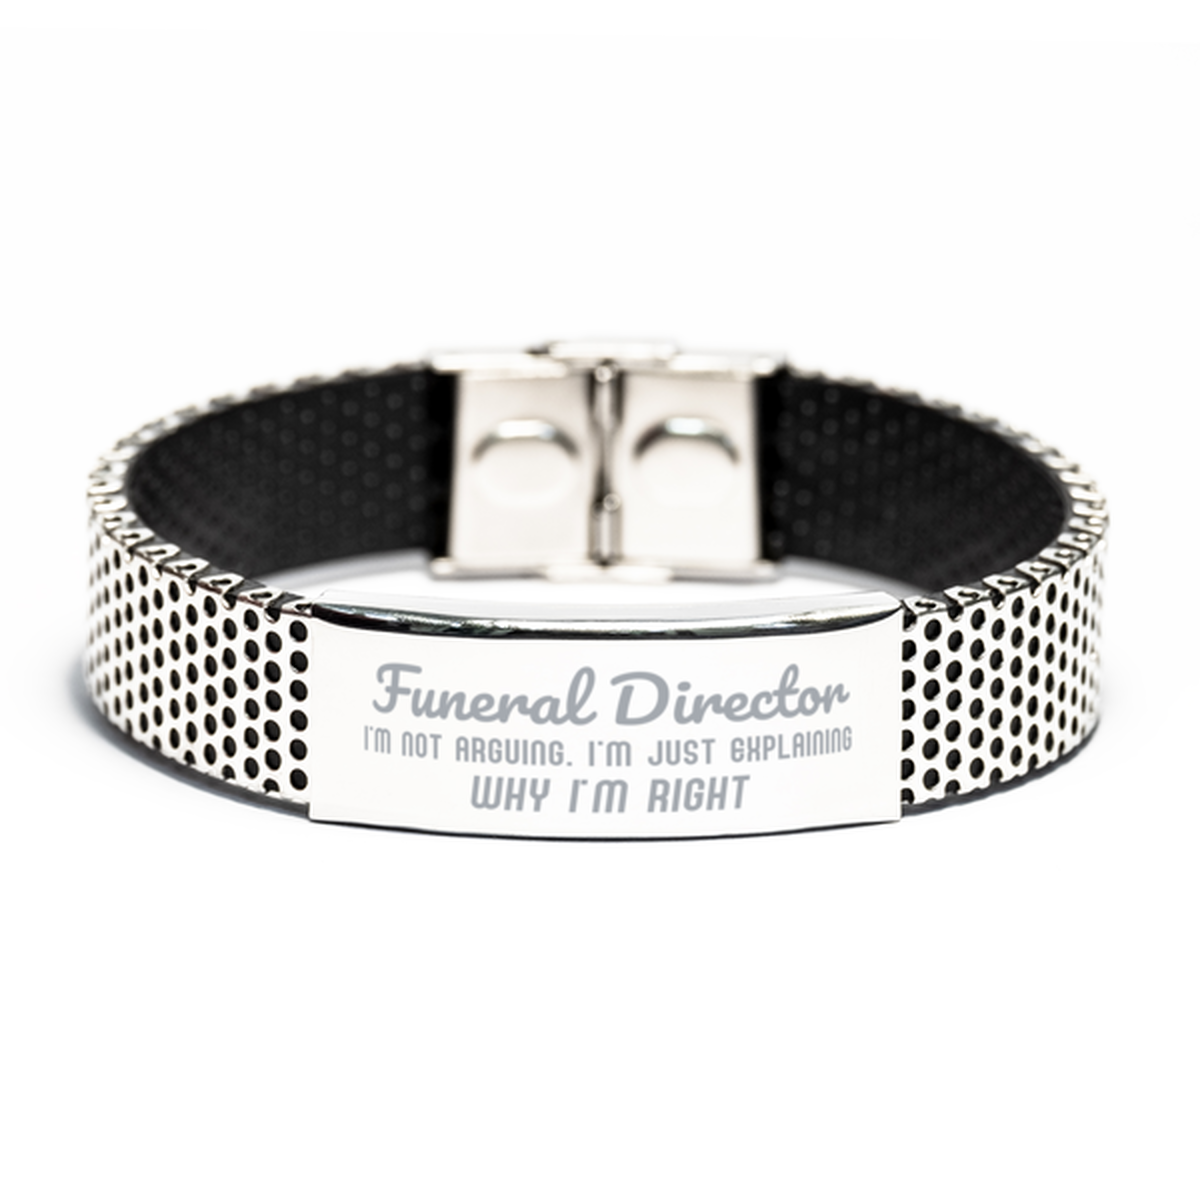 Funeral Director I'm not Arguing. I'm Just Explaining Why I'm RIGHT Stainless Steel Bracelet, Funny Saying Quote Funeral Director Gifts For Funeral Director Graduation Birthday Christmas Gifts for Men Women Coworker